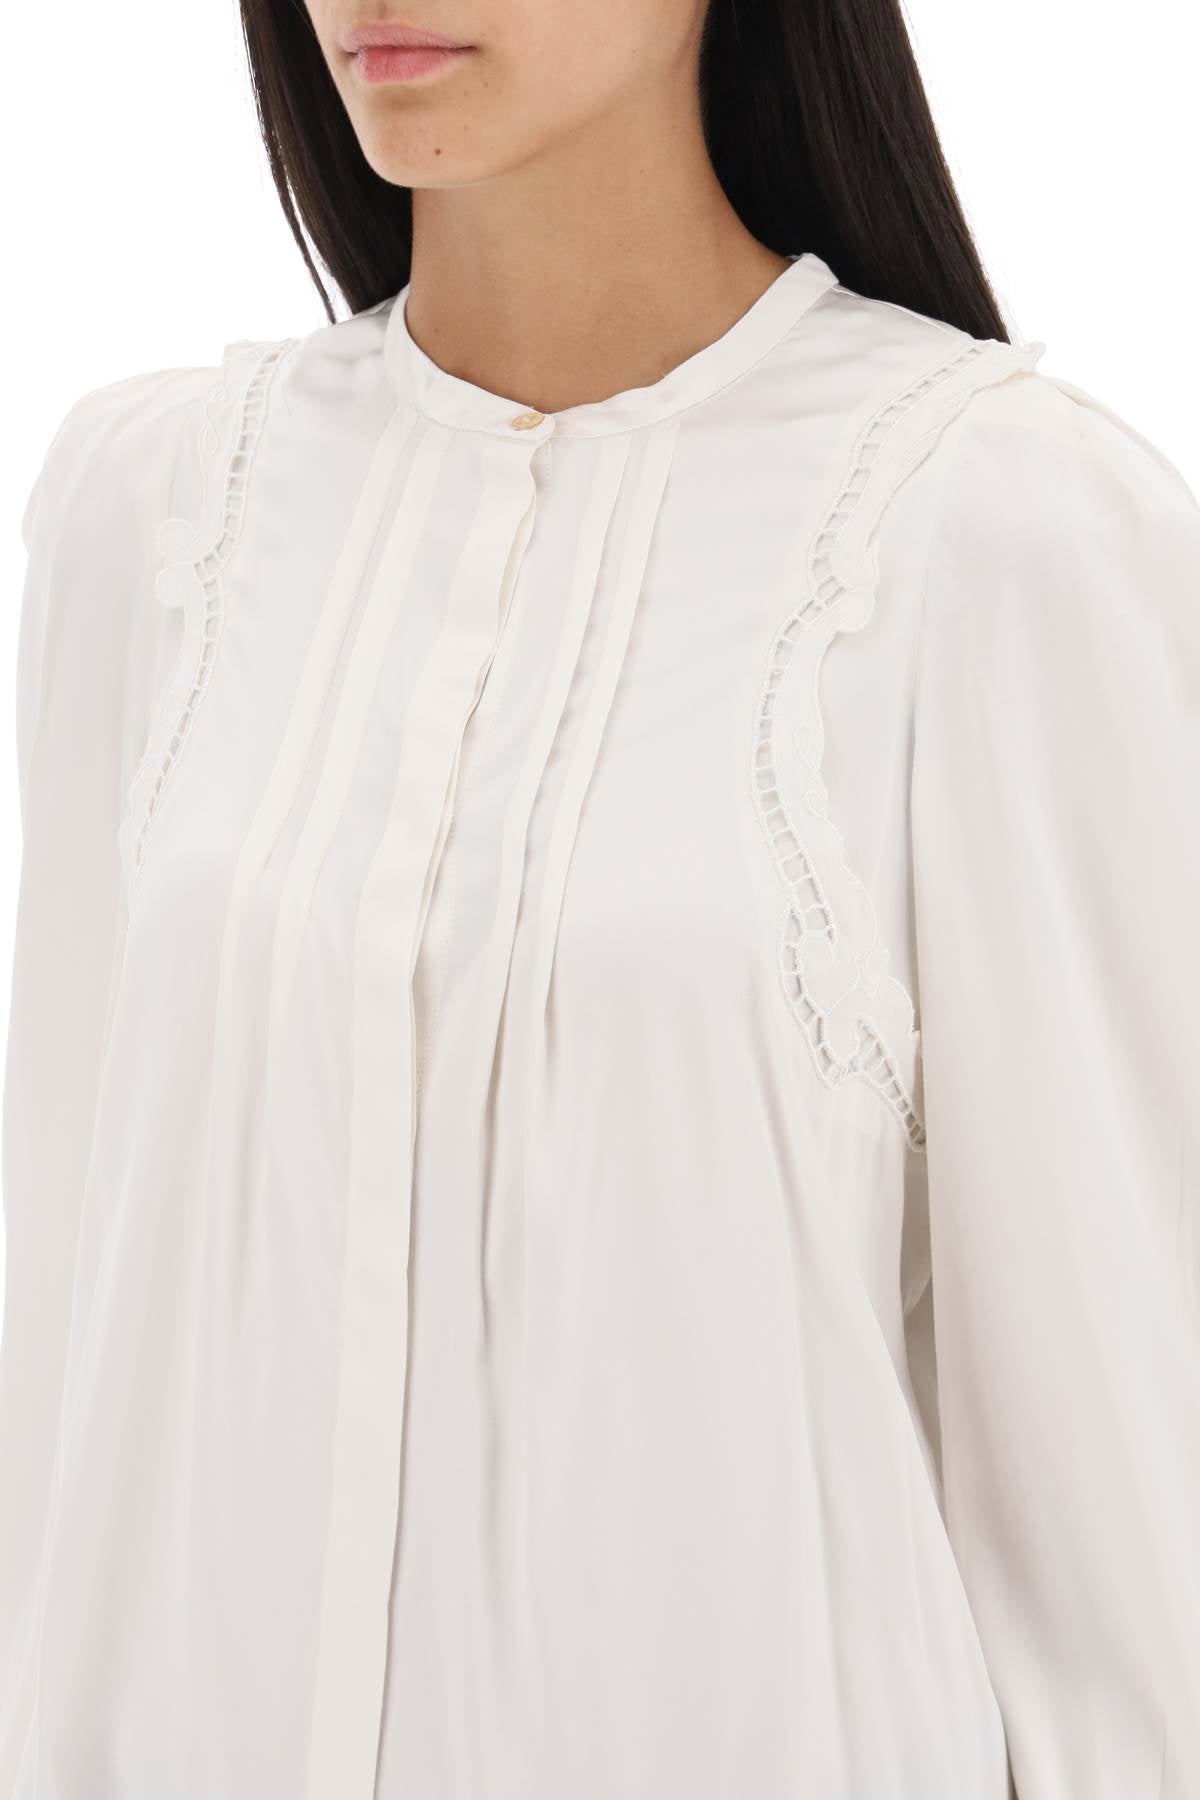 Isabel marant 'joanea' satin blouse with cutwork embroideries-3